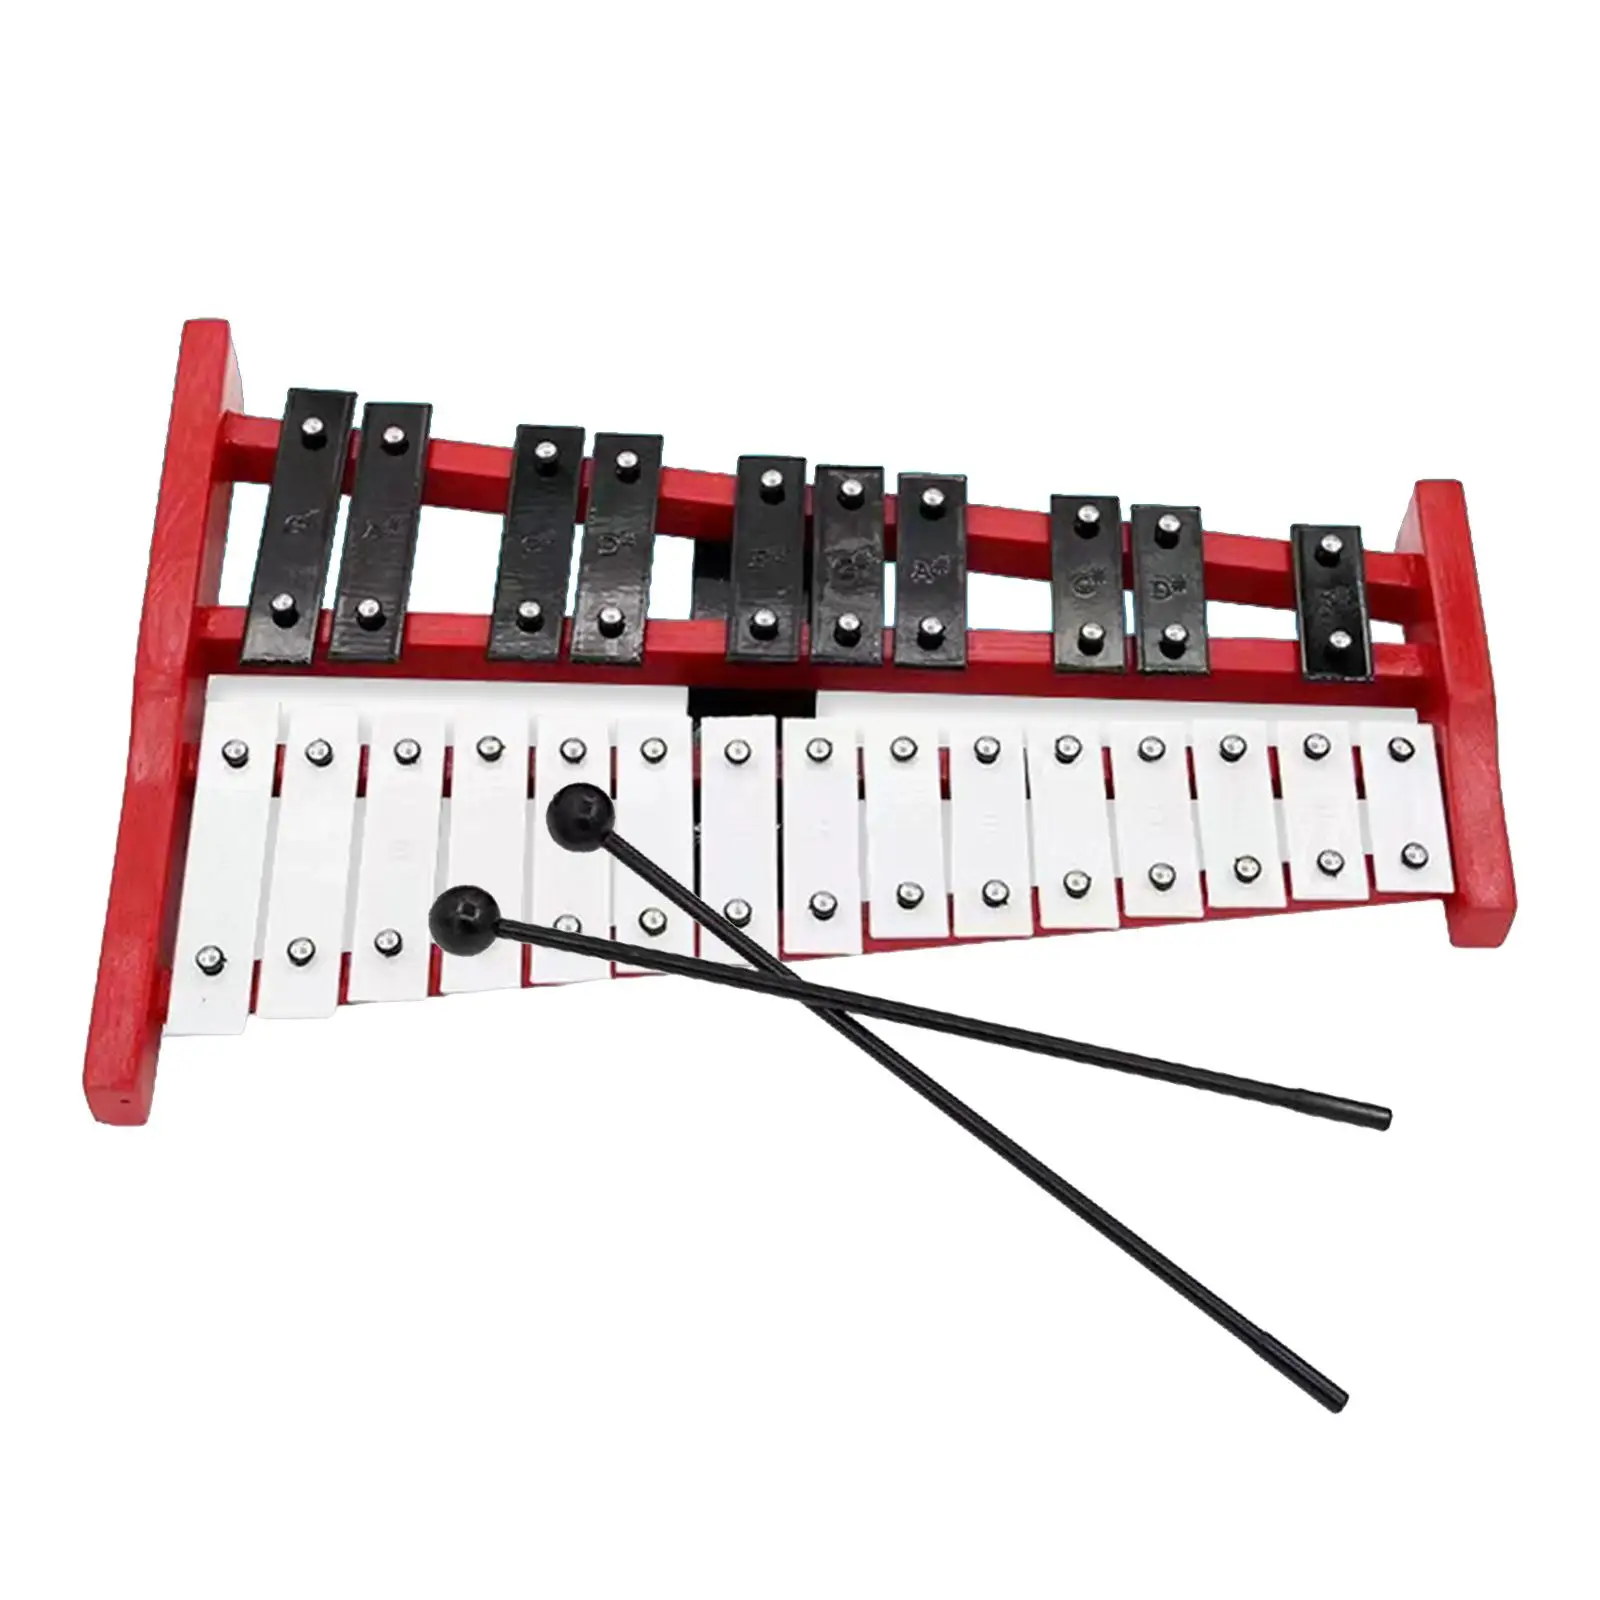 Xylophone Musical Toy 25 Note for Concert Family Sessions School Orchestras